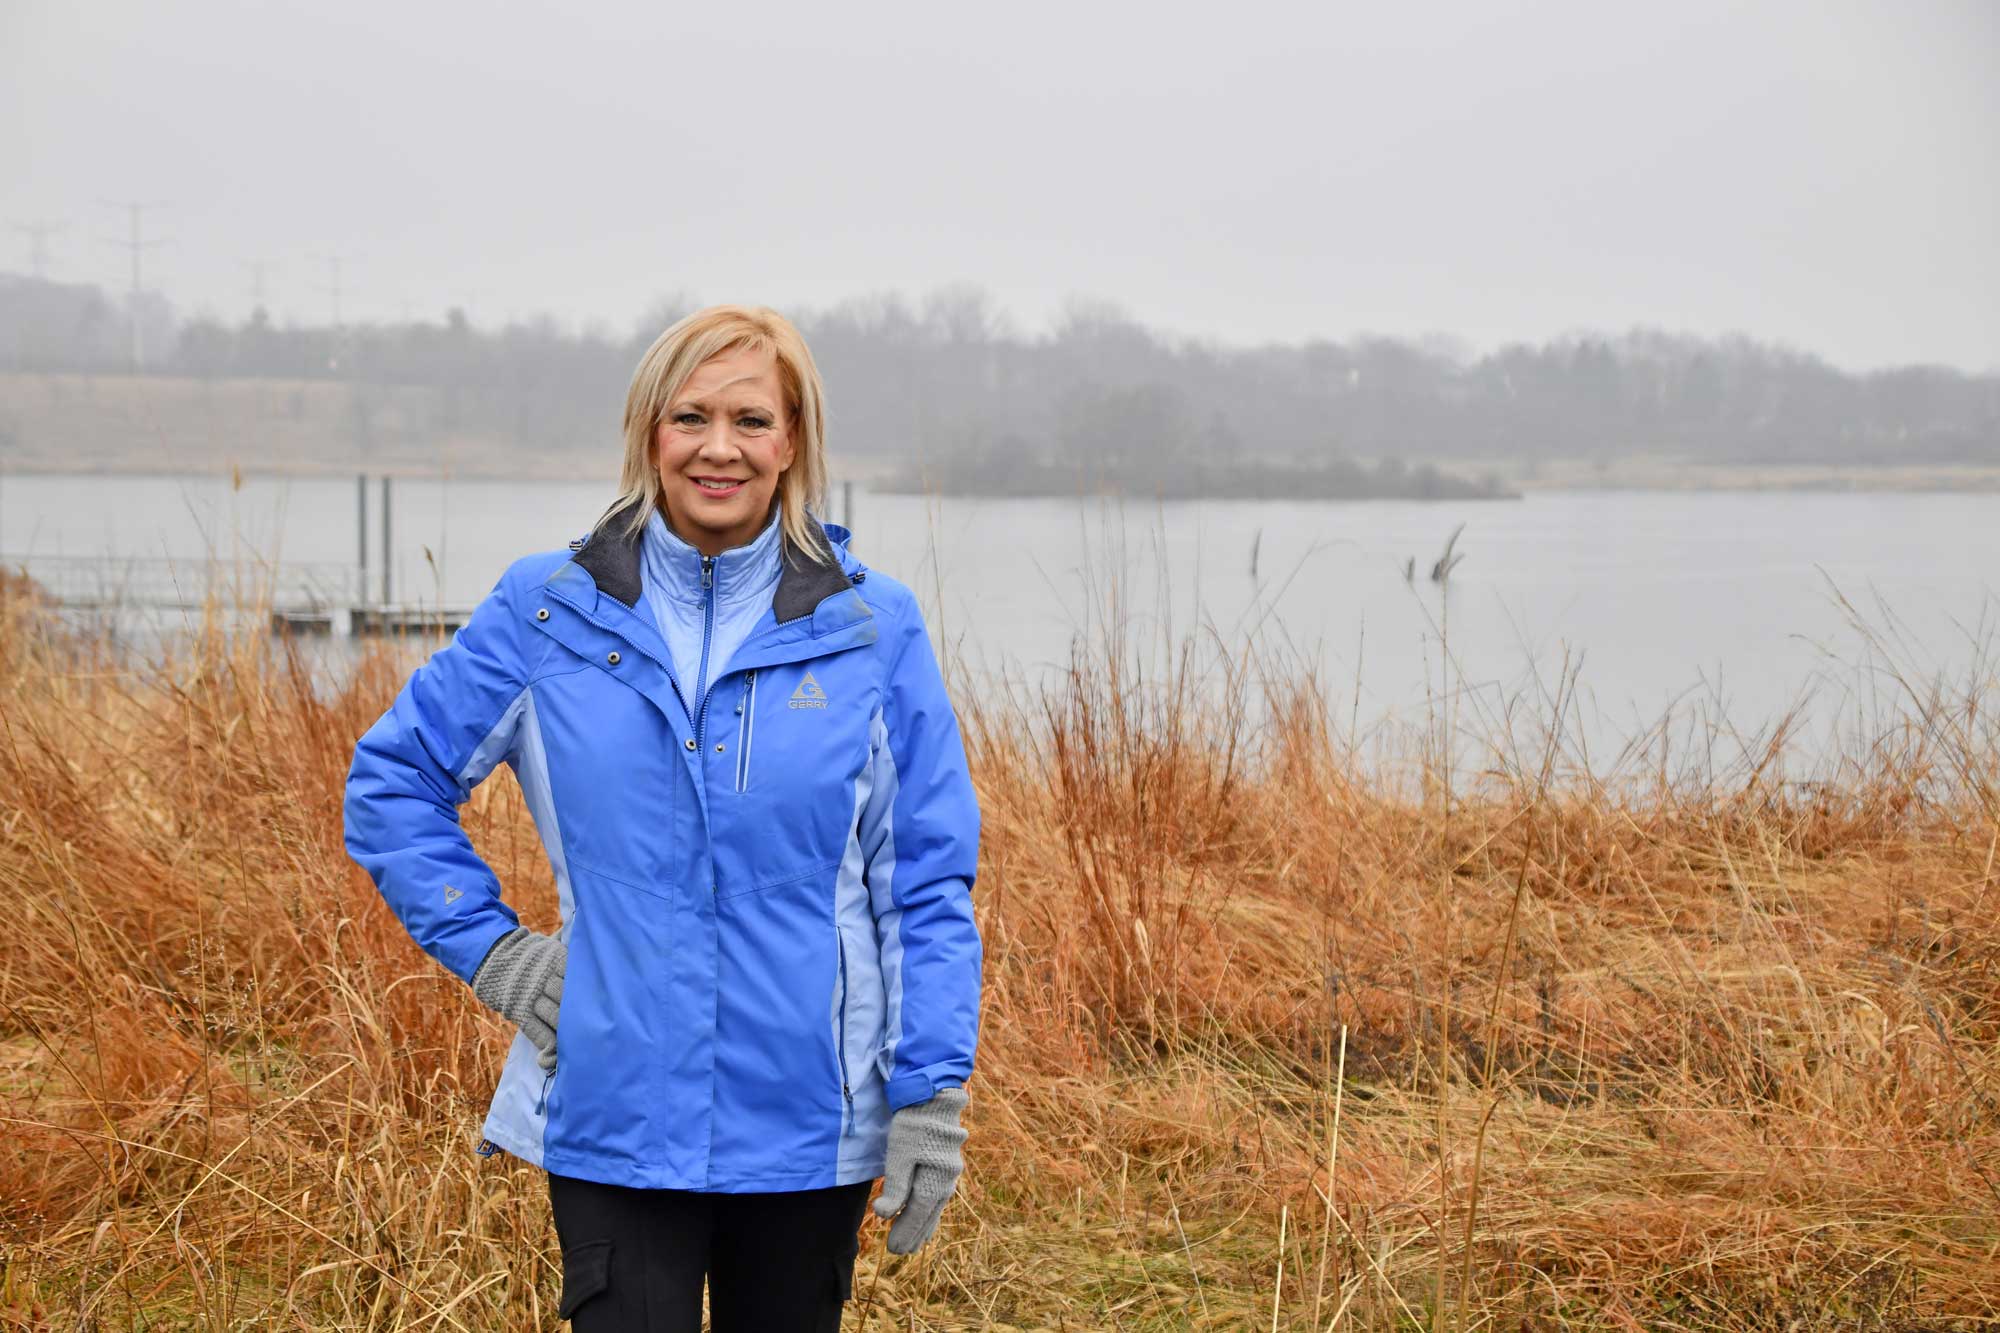 A woman in a blue jacket stands in a forest preserve with water in the background.